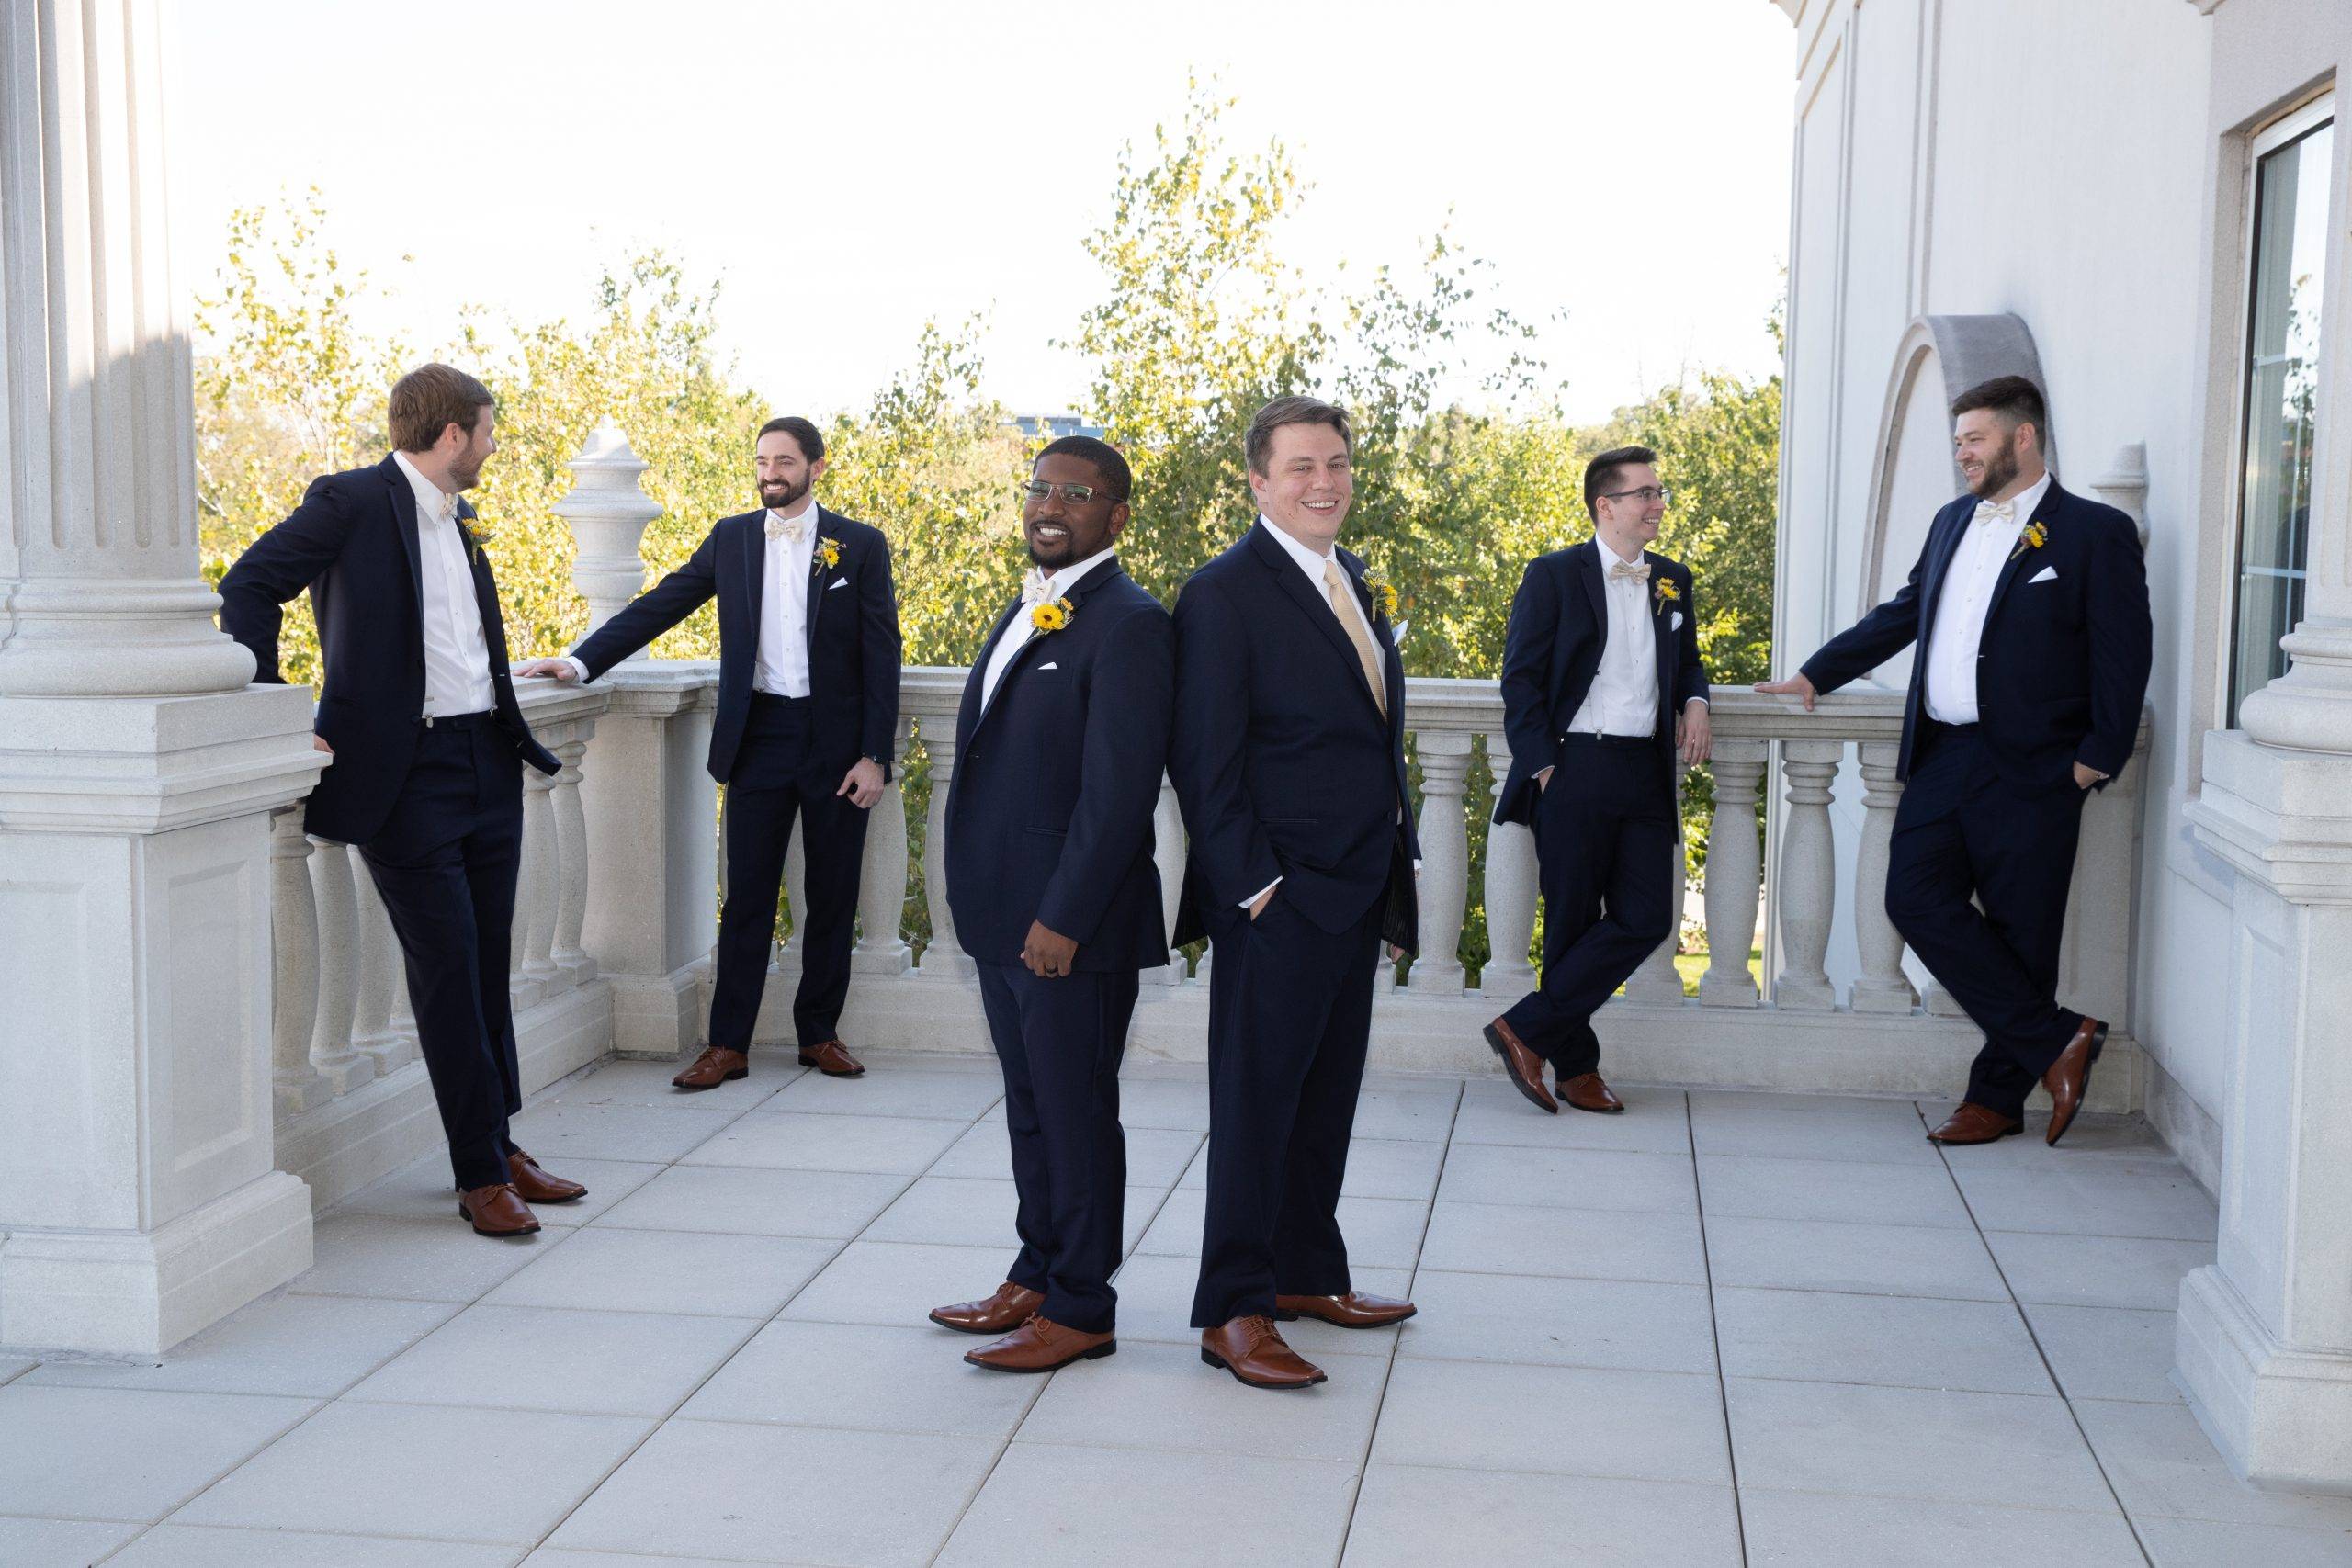 A group of groomsmen standing on a balcony.